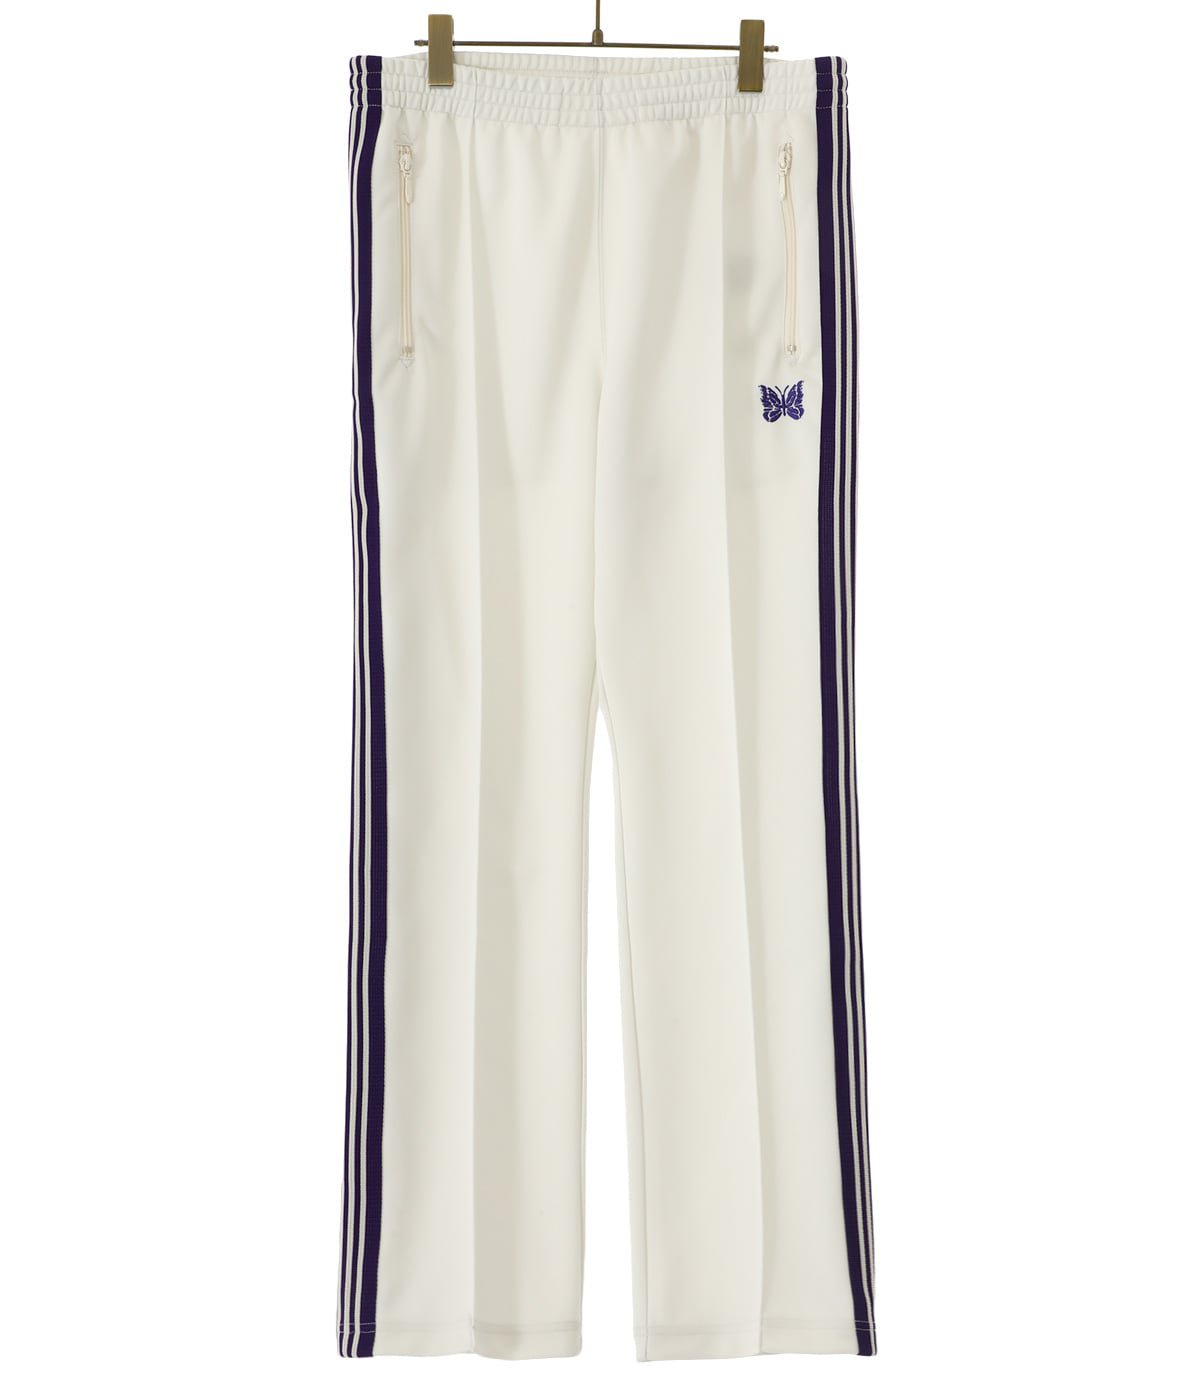 TRACK PANT - POLY SMOOTH / ICE WHT Sサイズ